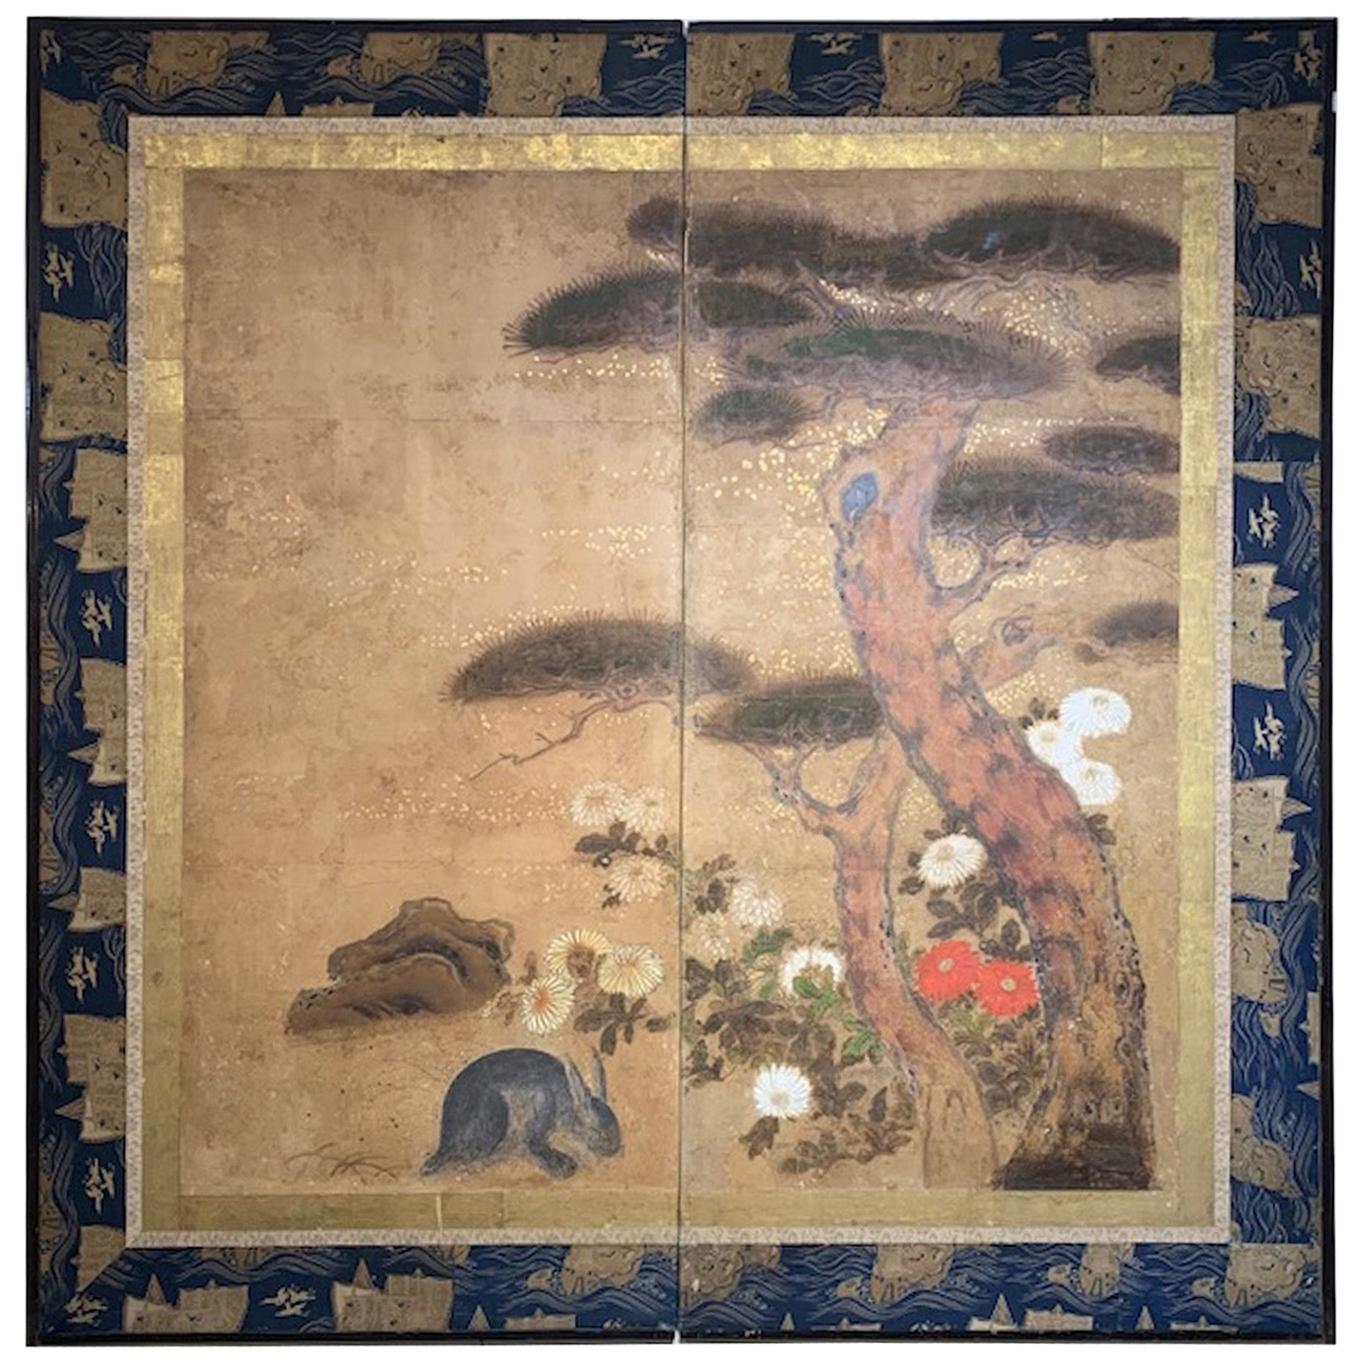 Edo Period '1615-1868' Pine Floral and Rabbit Screen For Sale